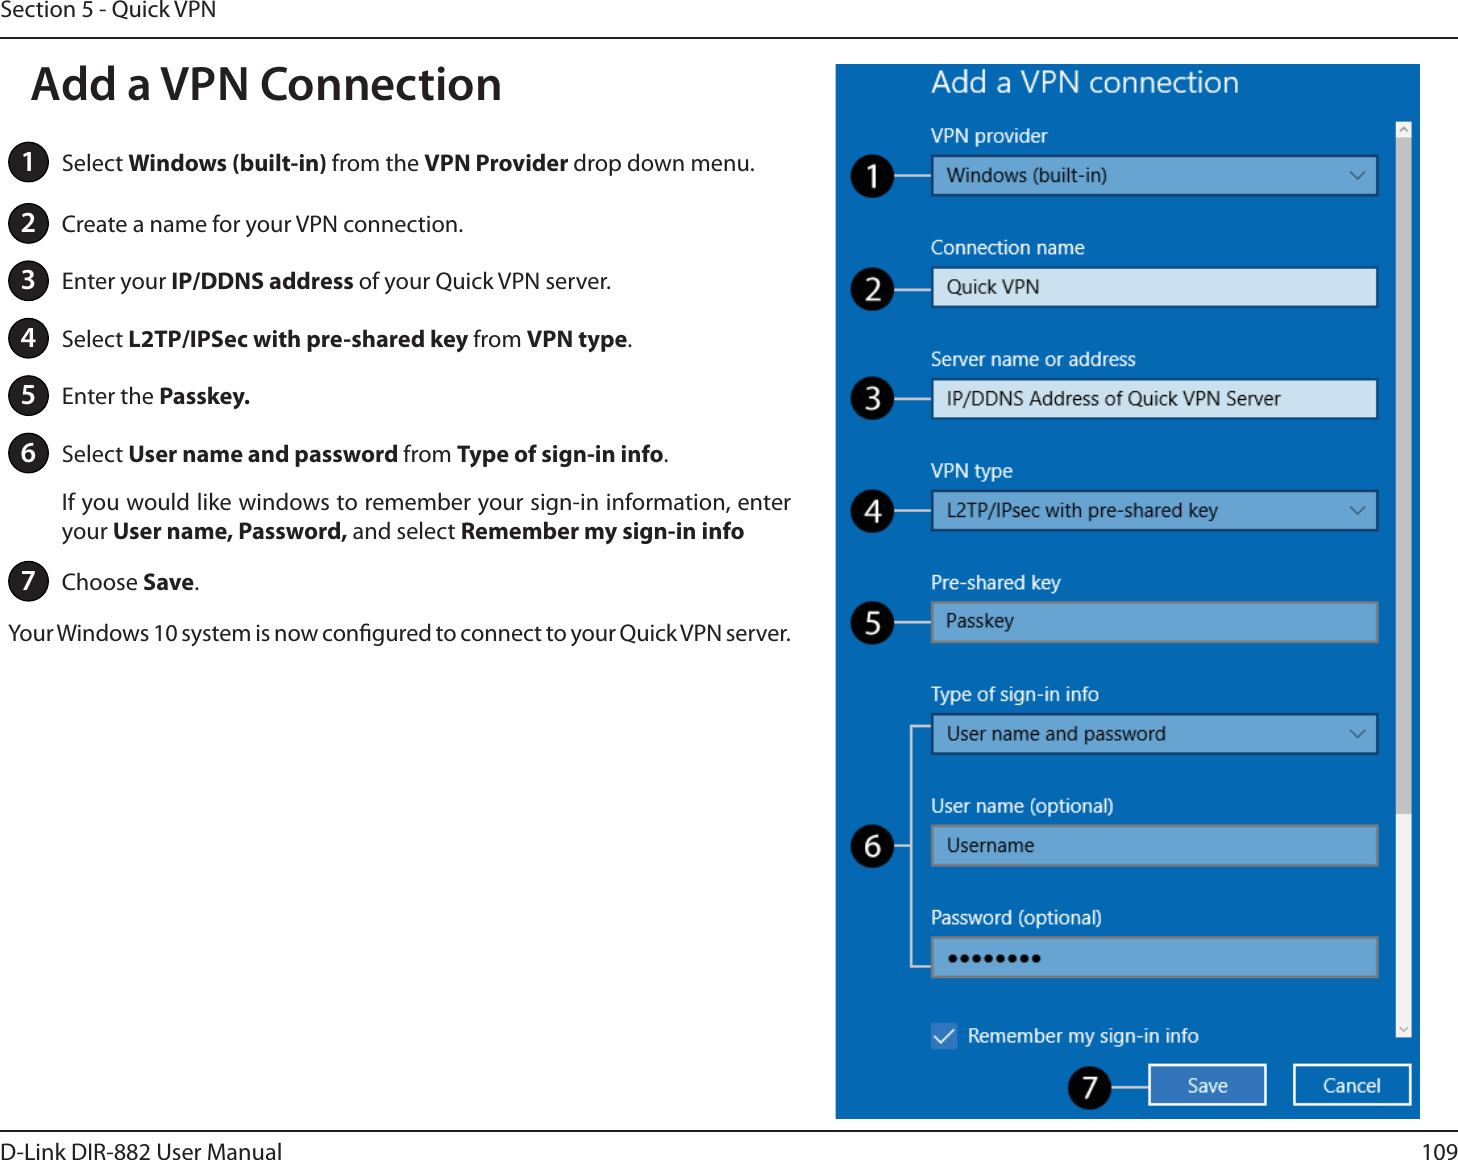 109D-Link DIR-882 User ManualSection 5 - Quick VPN1Select 8JOEPXTCVJMUJOfrom the VPN Provider drop down menu.2Create a name for your VPN connection.3Enter your *1%%/4BEESFTTof your Quick VPN server.4Select -51*14FD with pre-shared key from VPN type.5Enter the Passkey.6Select User name and password from Type of sign-in info.If you would like windows to remember your sign-in information, enter your 6TFSOBNF1BTTXPSEand select Remember my sign-in info7Choose Save.Your Windows 10 system is now congured to connect to your Quick VPN server.Add a VPN Connection